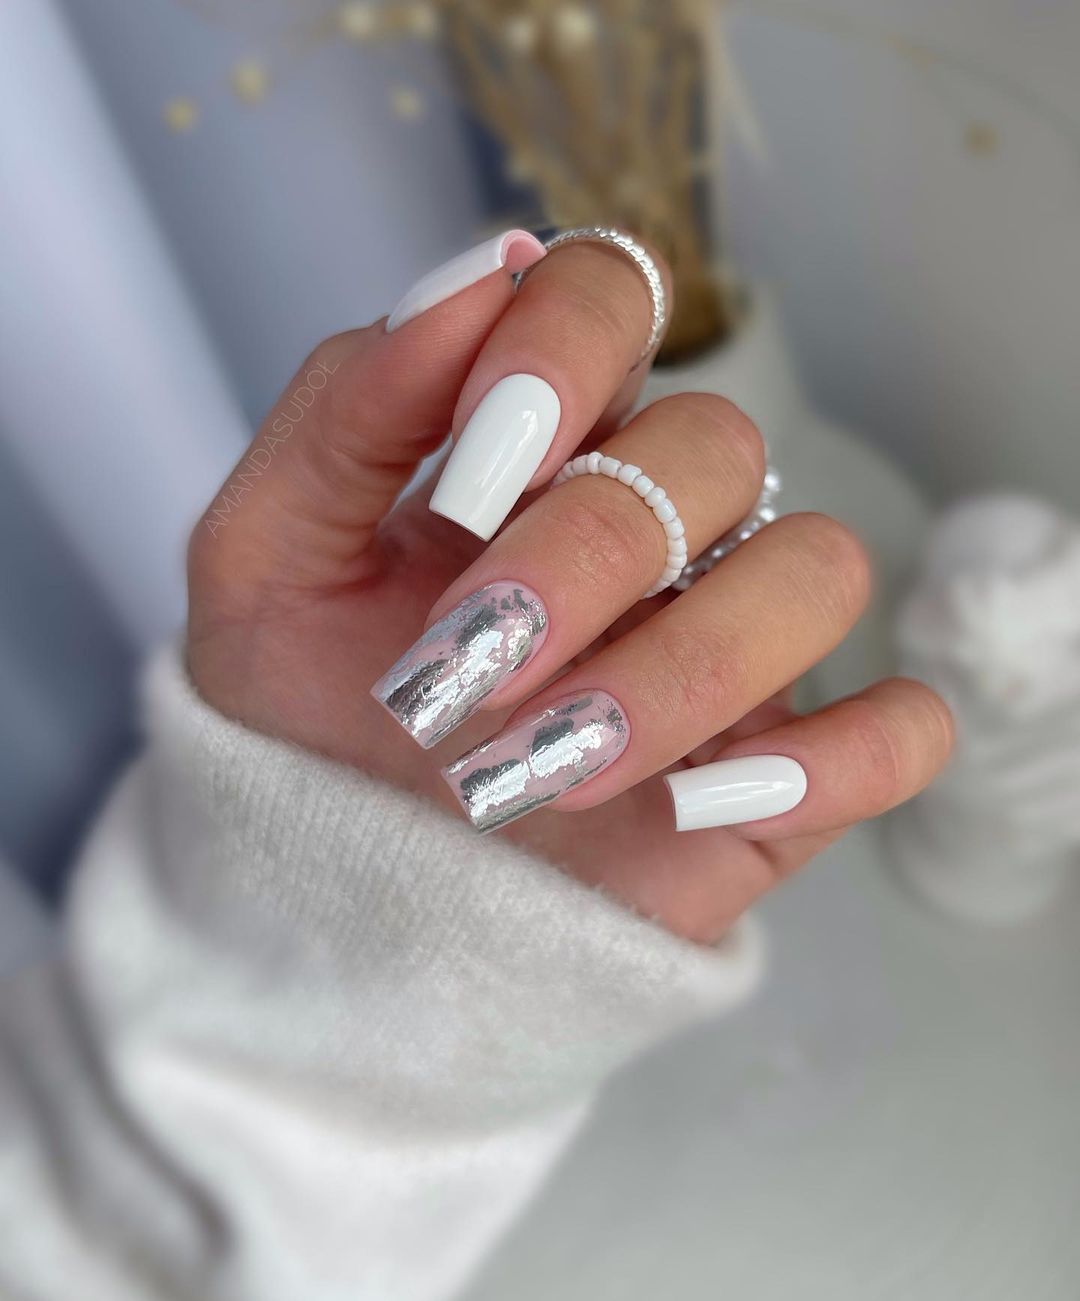 White and Silver Design on Square Nails